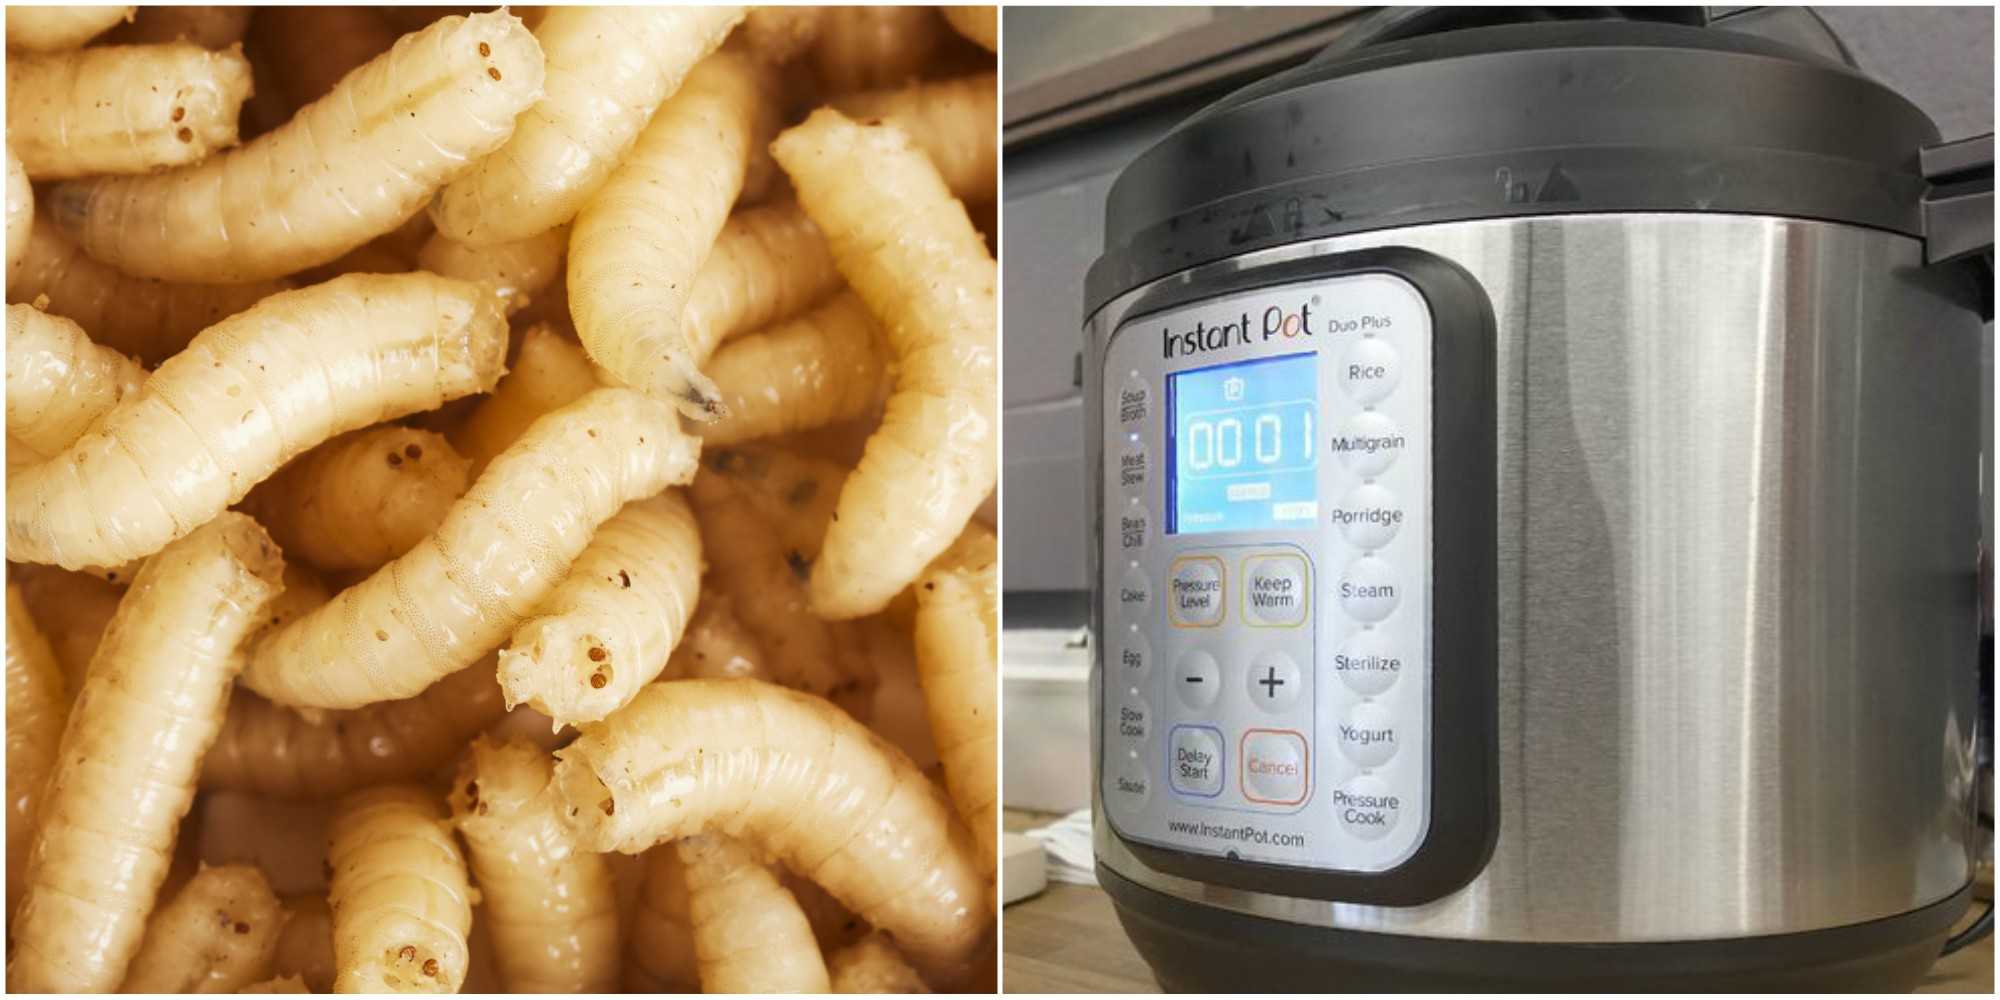 There could be maggots growing in your Instant Pot if you're not cleaning it right